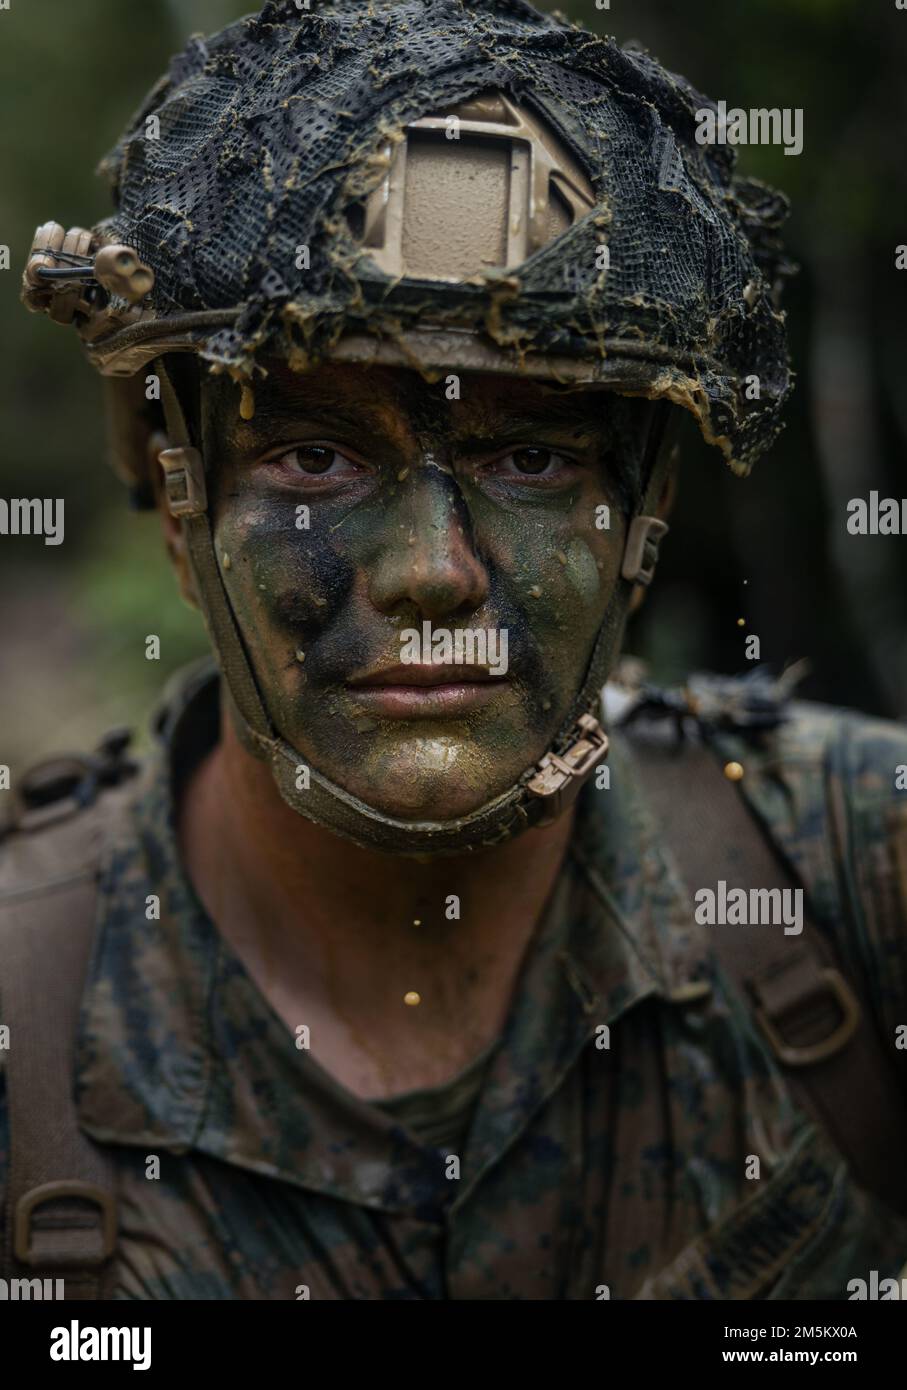 U.S. Marine Corps Staff Sgt. Charles Copeland, a joint terminal attack controller with 5th Air Naval Gunfire Liaison Company, III Marine Expeditionary Force Information Group, looks into a camera after completing an endurance course at Jungle Warfare Training Center, Camp Gonsalves, Okinawa, Japan, March 24, 2022. The endurance course was part of an overall Jungle Field Exercise conducted on March 21-25. During the FEX, III MIG Marines practiced their ability to conduct distributed operations in an austere environment. JWTC provides challenging terrain that is found on many of the islands in t Stock Photo